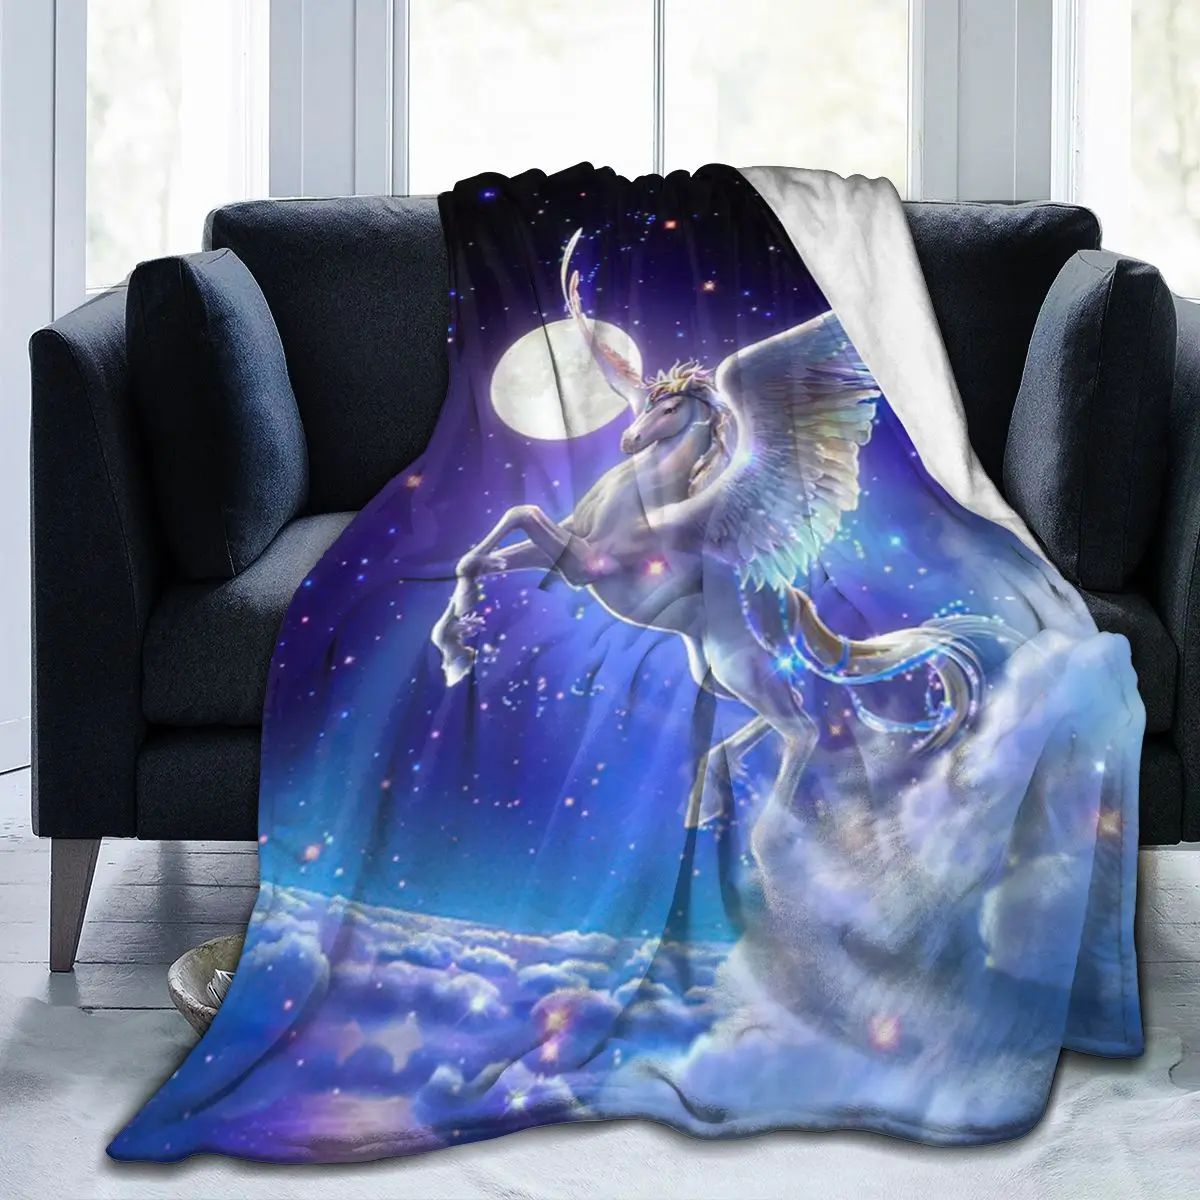 

Ultra Soft Sofa Blanket Cover Blanket Cartoon Cartoon Bedding Flannel plied Sofa Bedroom Decor for Children and Adults 278698829